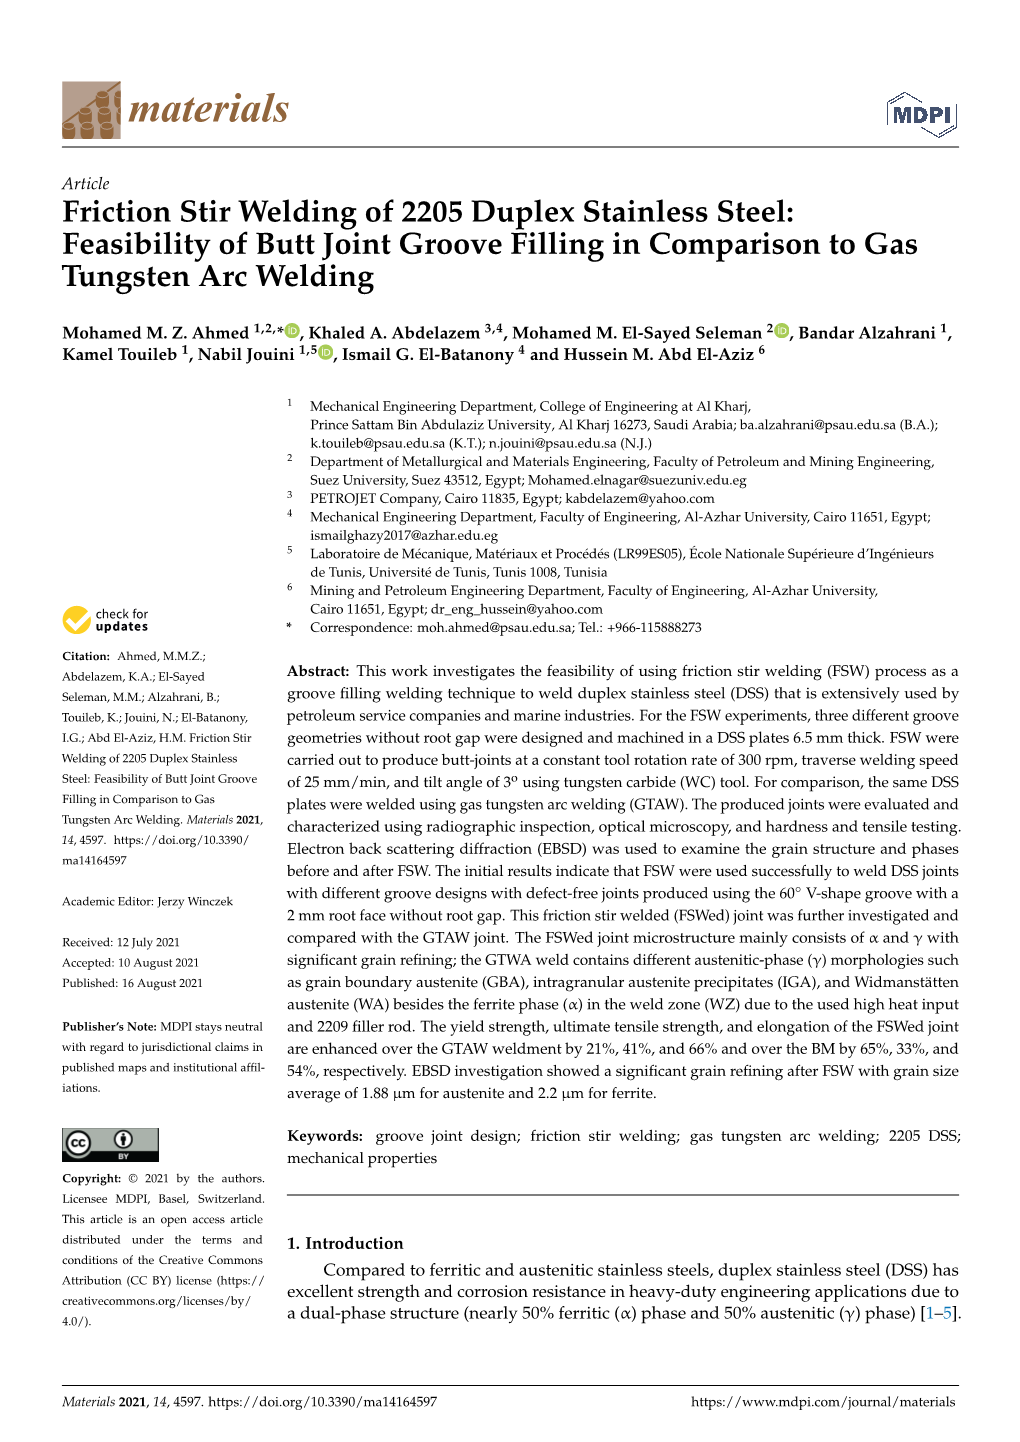 Friction Stir Welding of 2205 Duplex Stainless Steel: Feasibility of Butt Joint Groove Filling in Comparison to Gas Tungsten Arc Welding